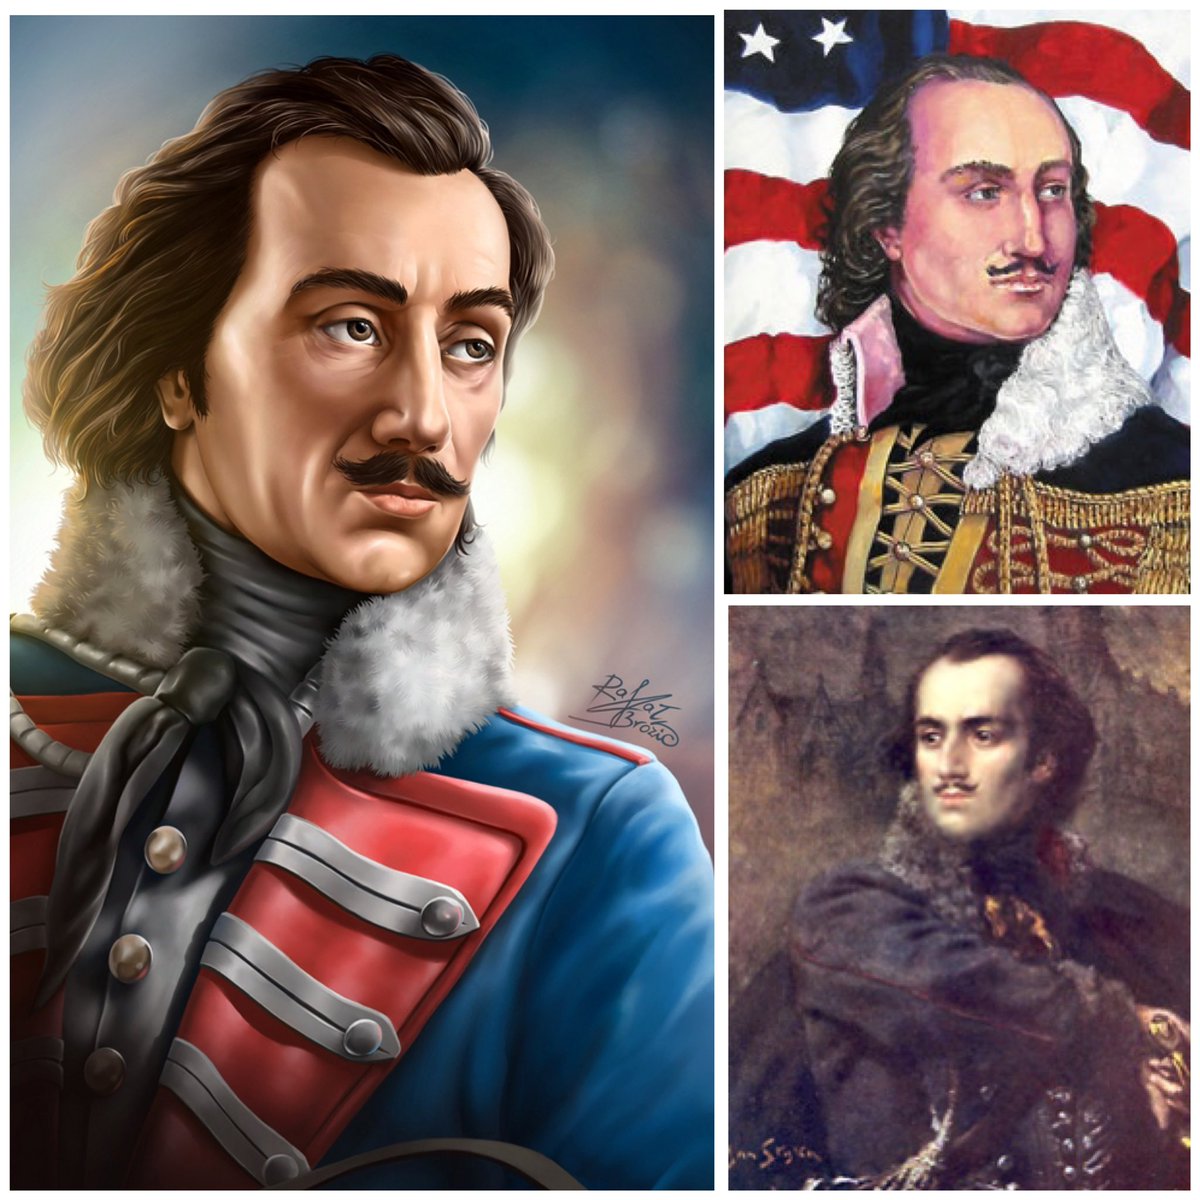 As a Revolutionary War Historian and of Polish descent on my paternal side, #CasimirPulaski is to me both a fascinating figure, and an inspiration as a 𝑓𝑟𝑒𝑒𝑑𝑜𝑚 𝑓𝑖𝑔ℎ𝑡𝑒𝑟 𝑎𝑛𝑑 𝑝𝑎𝑡𝑟𝑖𝑜𝑡 𝑖𝑛 𝑏𝑜𝑡ℎ 𝑡ℎ𝑒 𝑼𝒏𝒊𝒕𝒆𝒅 𝑺𝒕𝒂𝒕𝒆𝒔 𝒂𝒏𝒅 𝑷𝒐𝒍𝒂𝒏𝒅. 🇵🇱 🇺🇸